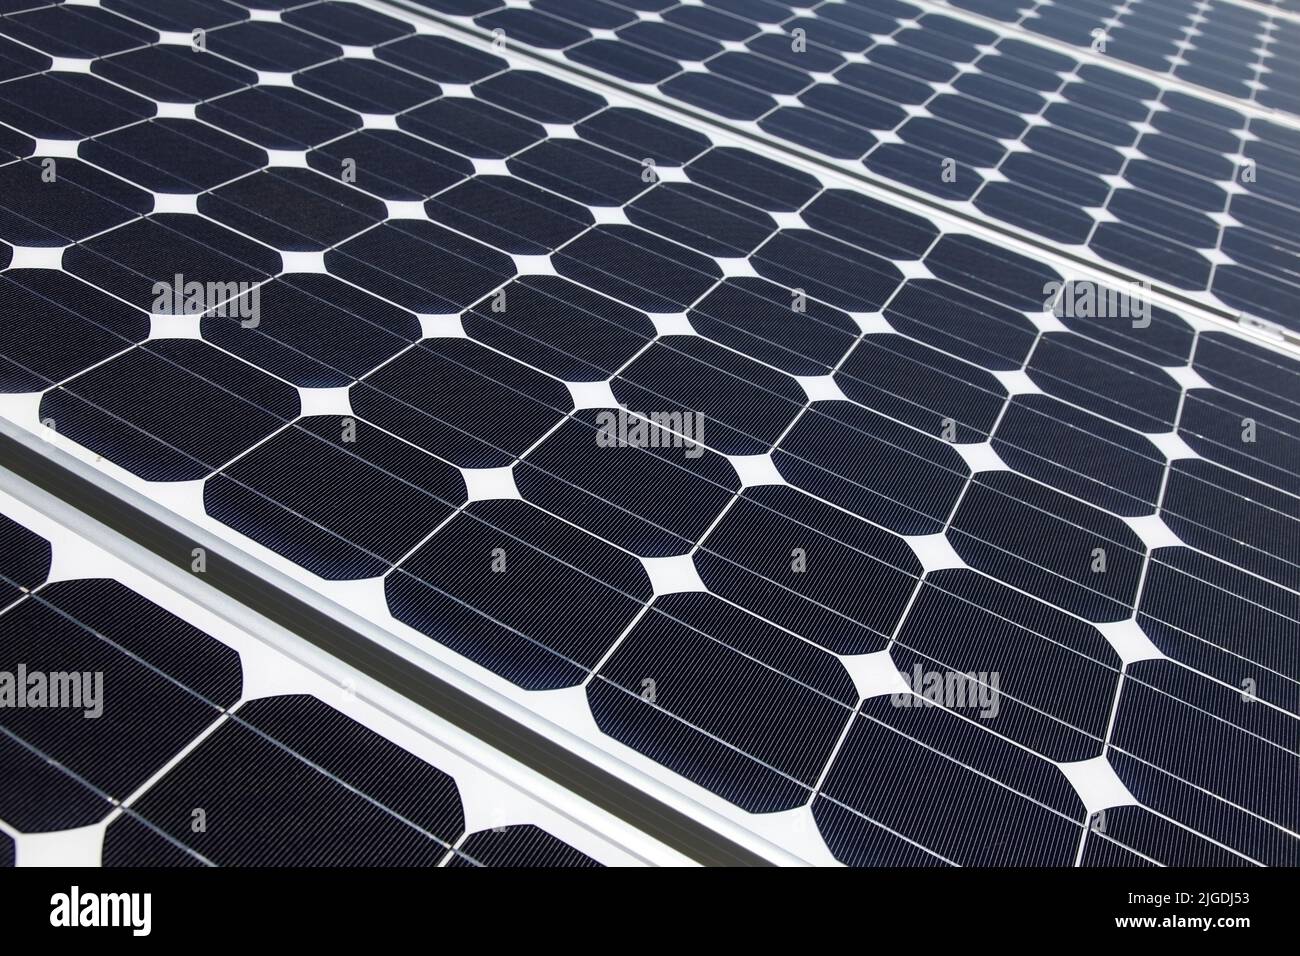 Closeup of solar panel cells mounted on roof top. Solar energy is becoming an important part of the energy mix. Stock Photo